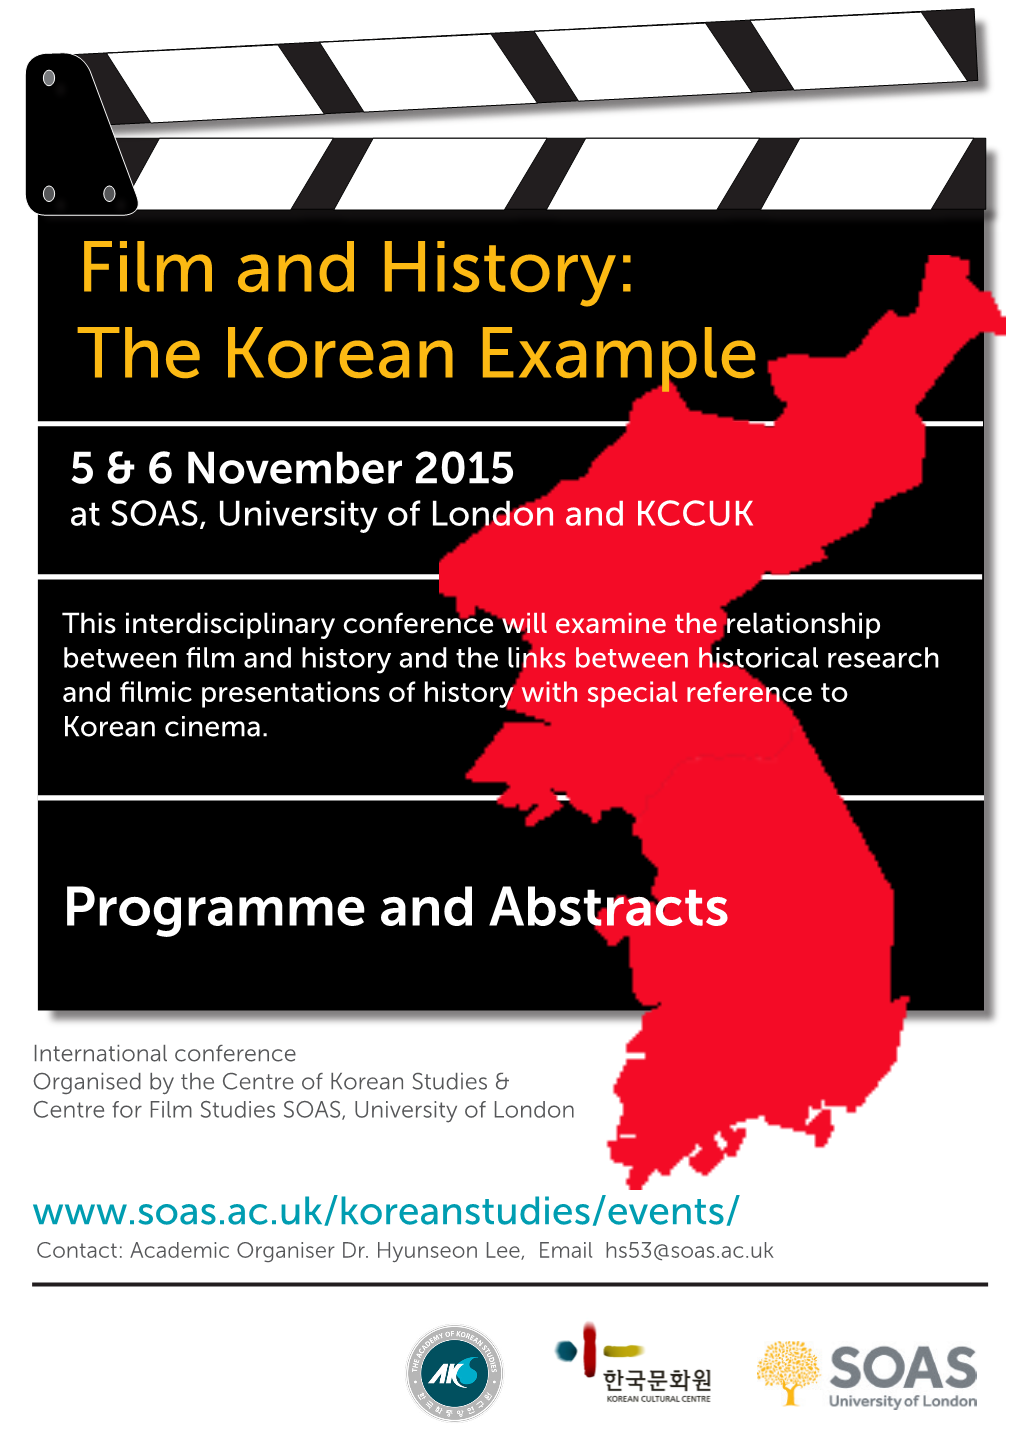 Film and History: the Korean Example